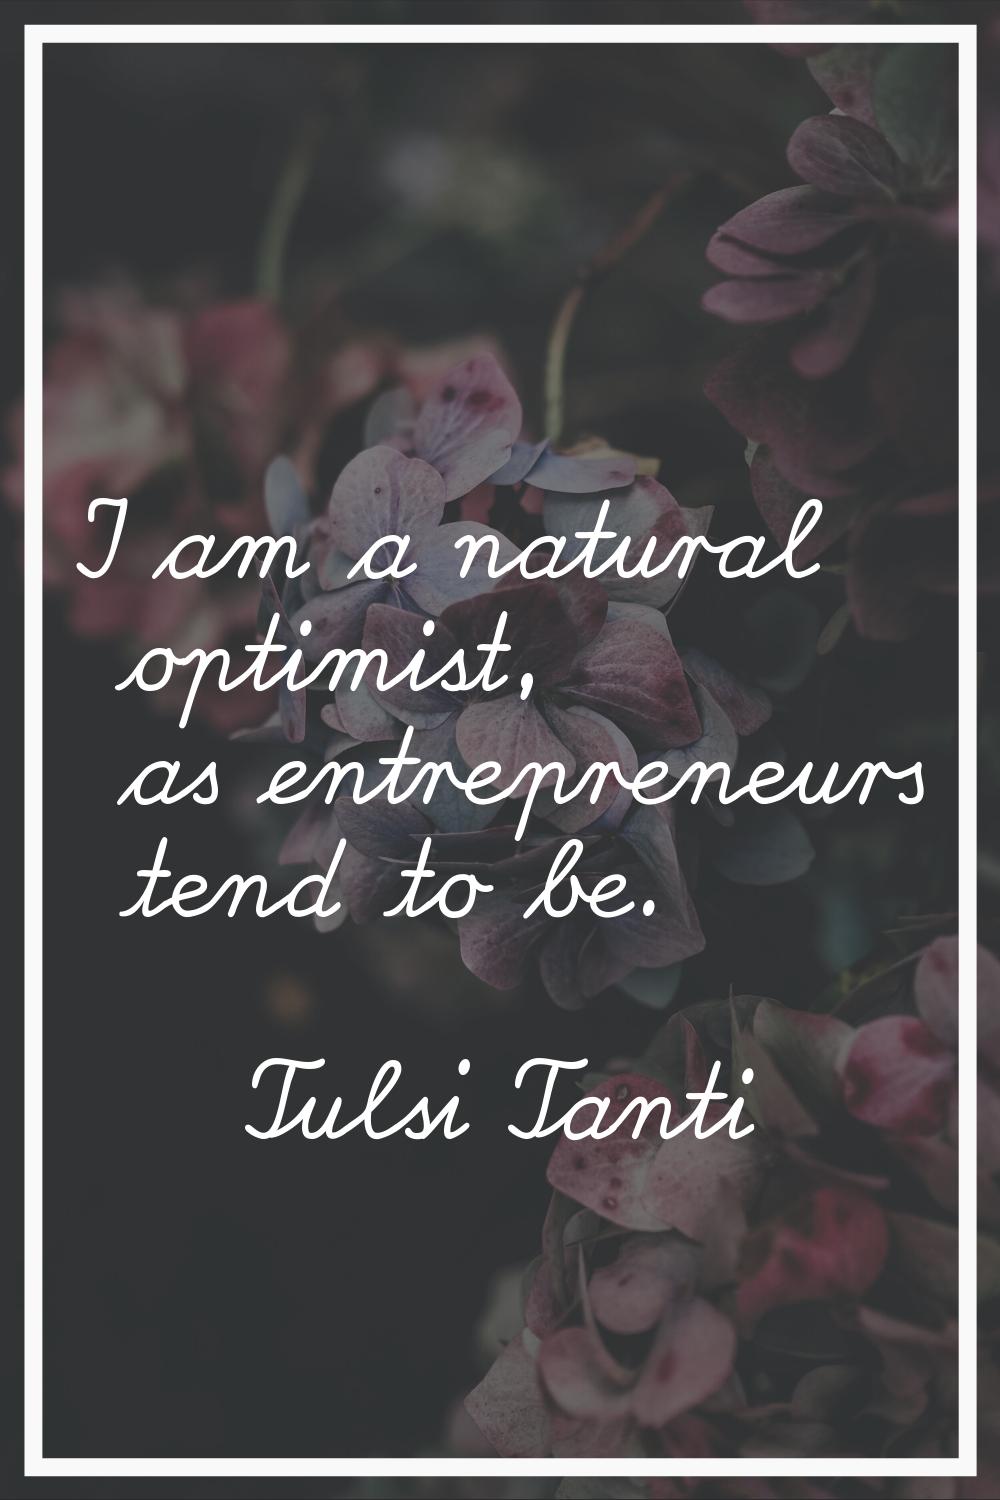 I am a natural optimist, as entrepreneurs tend to be.